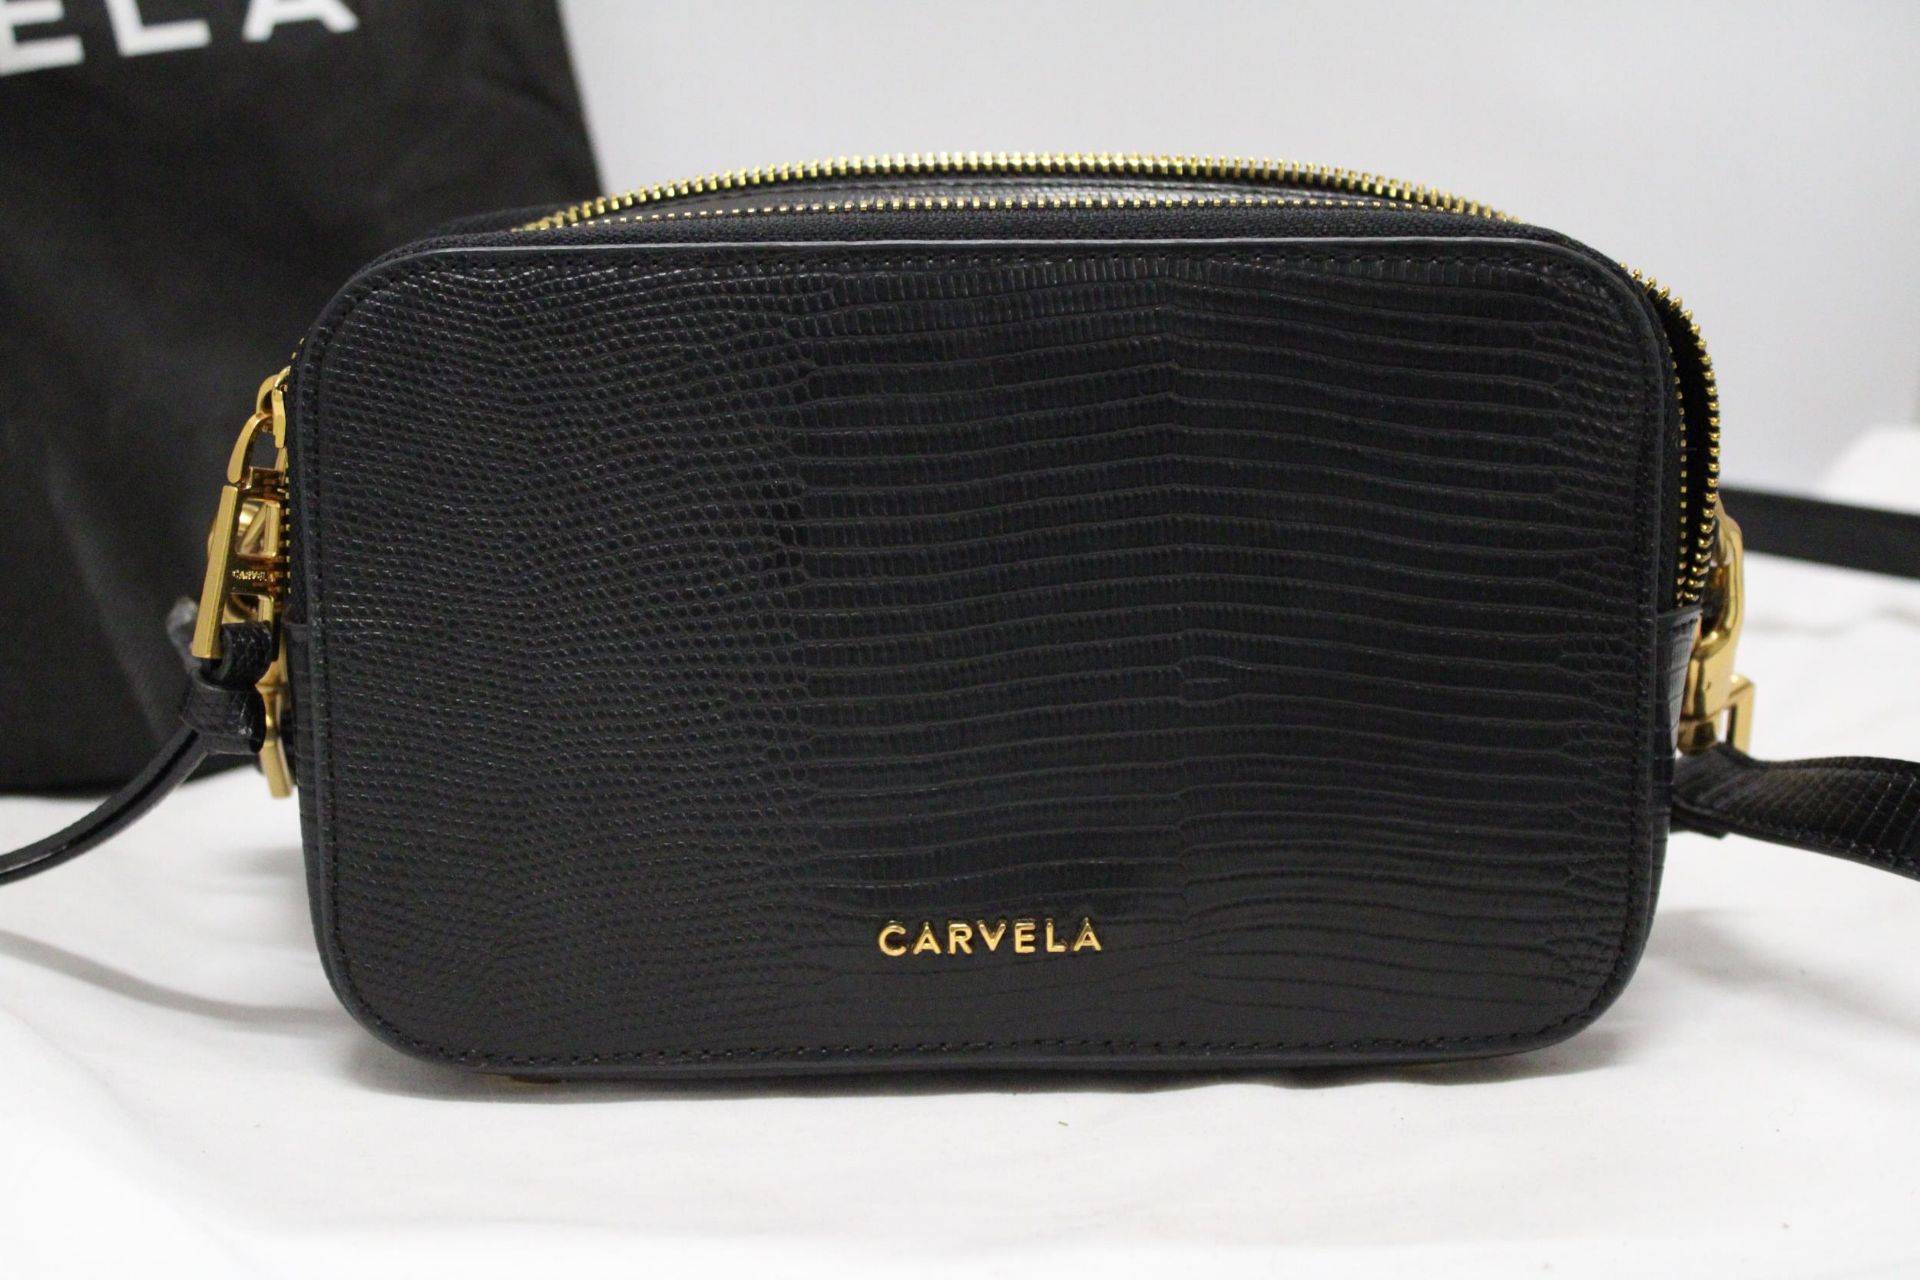 A CARVALA HANDBAG WITH DETACHABLE STRAPS AND DUST BAG - Image 4 of 6